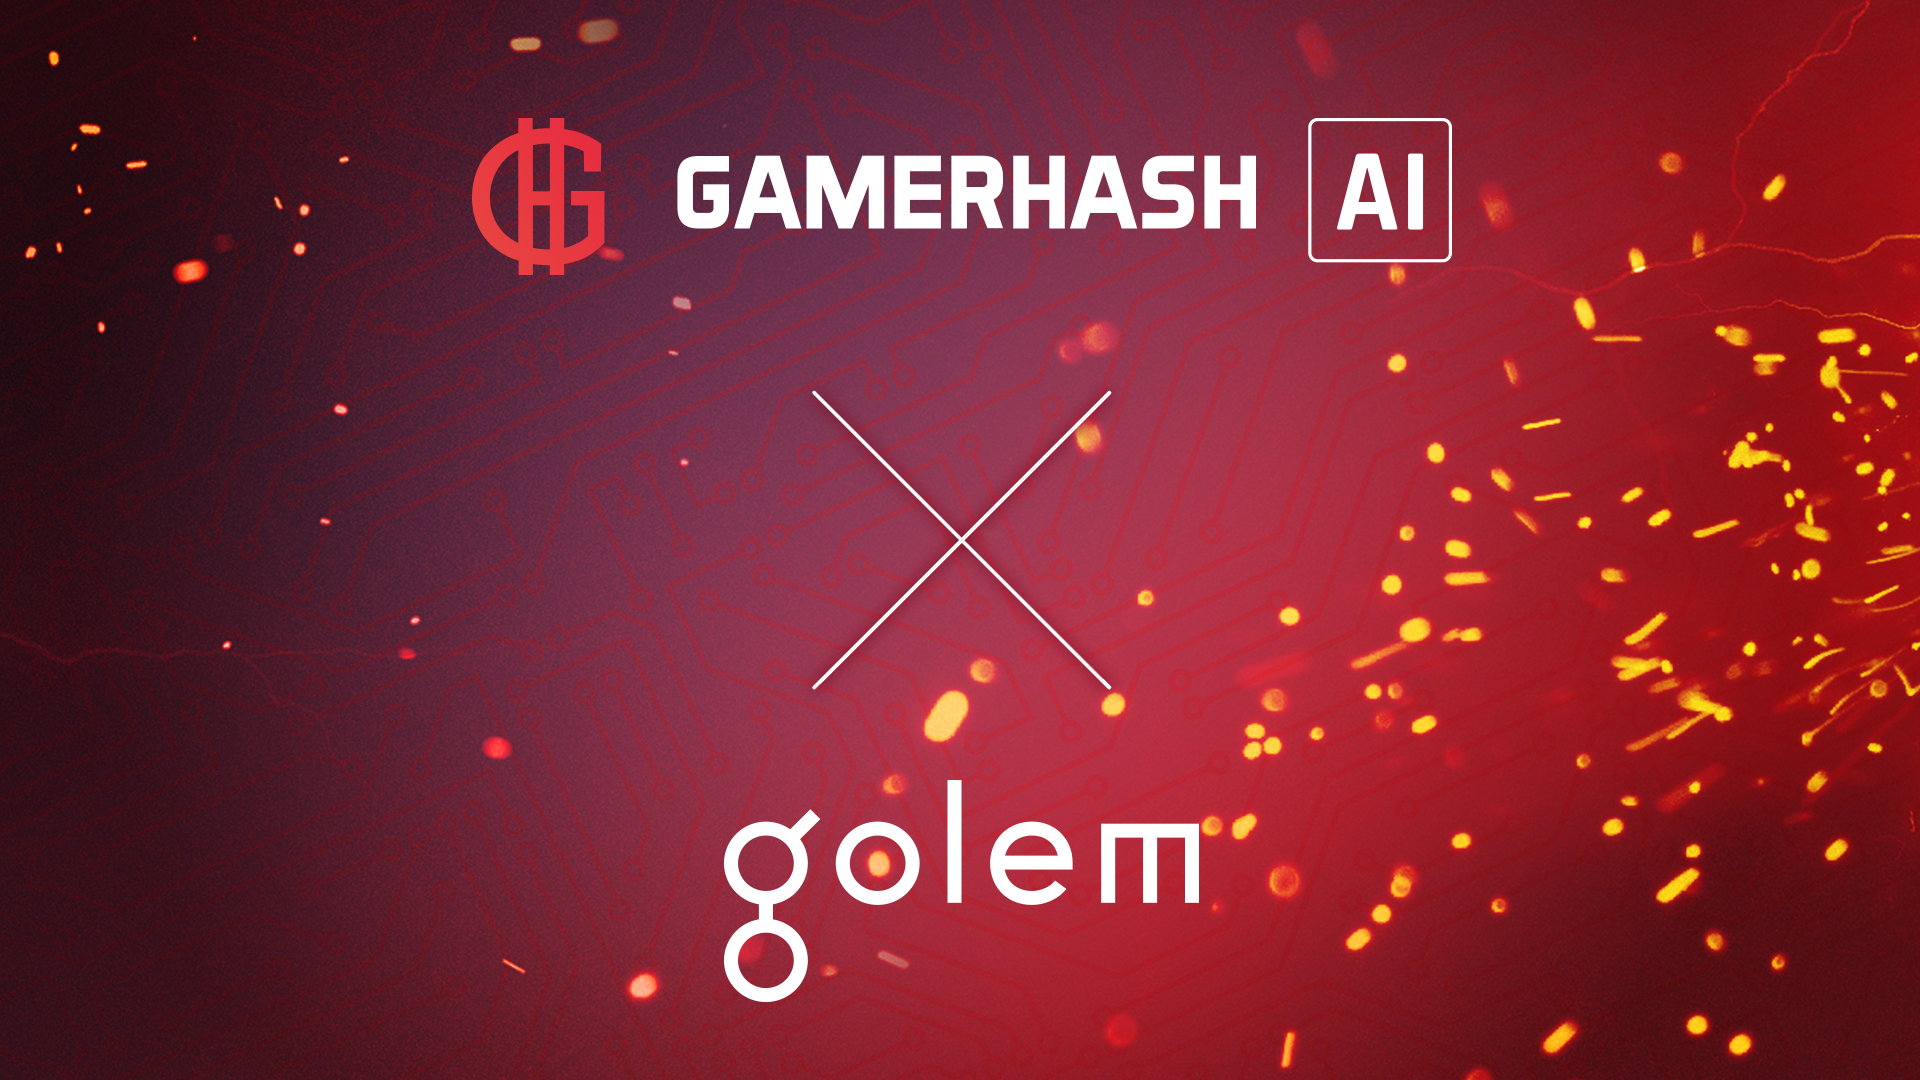 Golem Network and Gamerhash AI Join Forces to Provide GPU Resources to the AI Industry